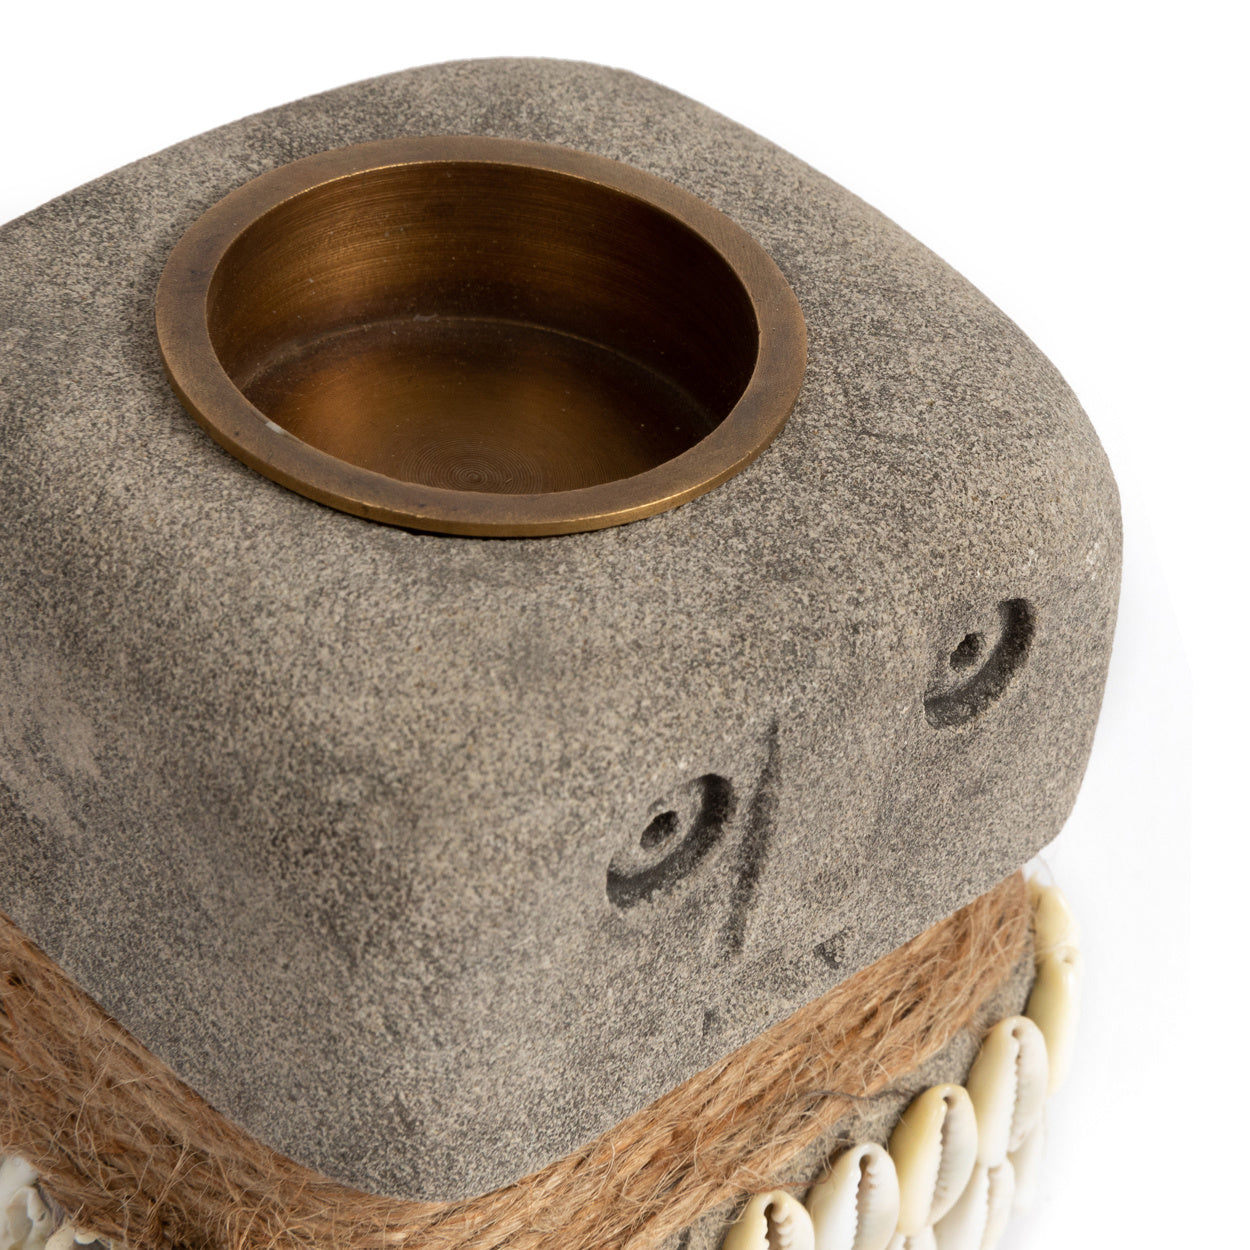 THE SUMBA STONE #31 Candle Holder top crop view